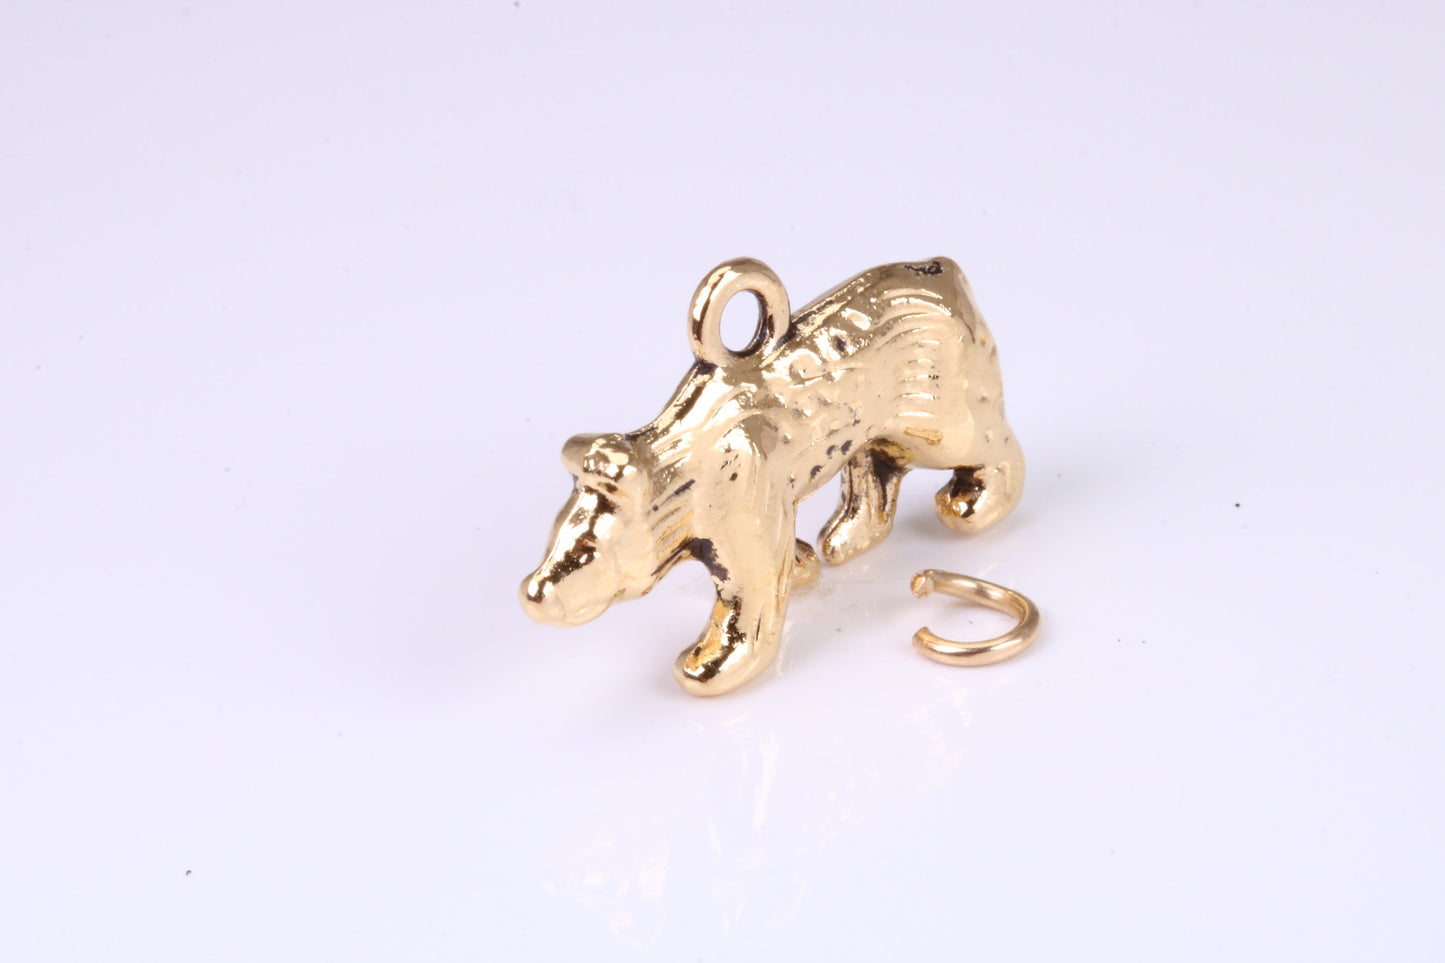 California Bear Charm, Traditional Charm, Made from Solid Yellow Gold, British Hallmarked, Complete with Attachment Link